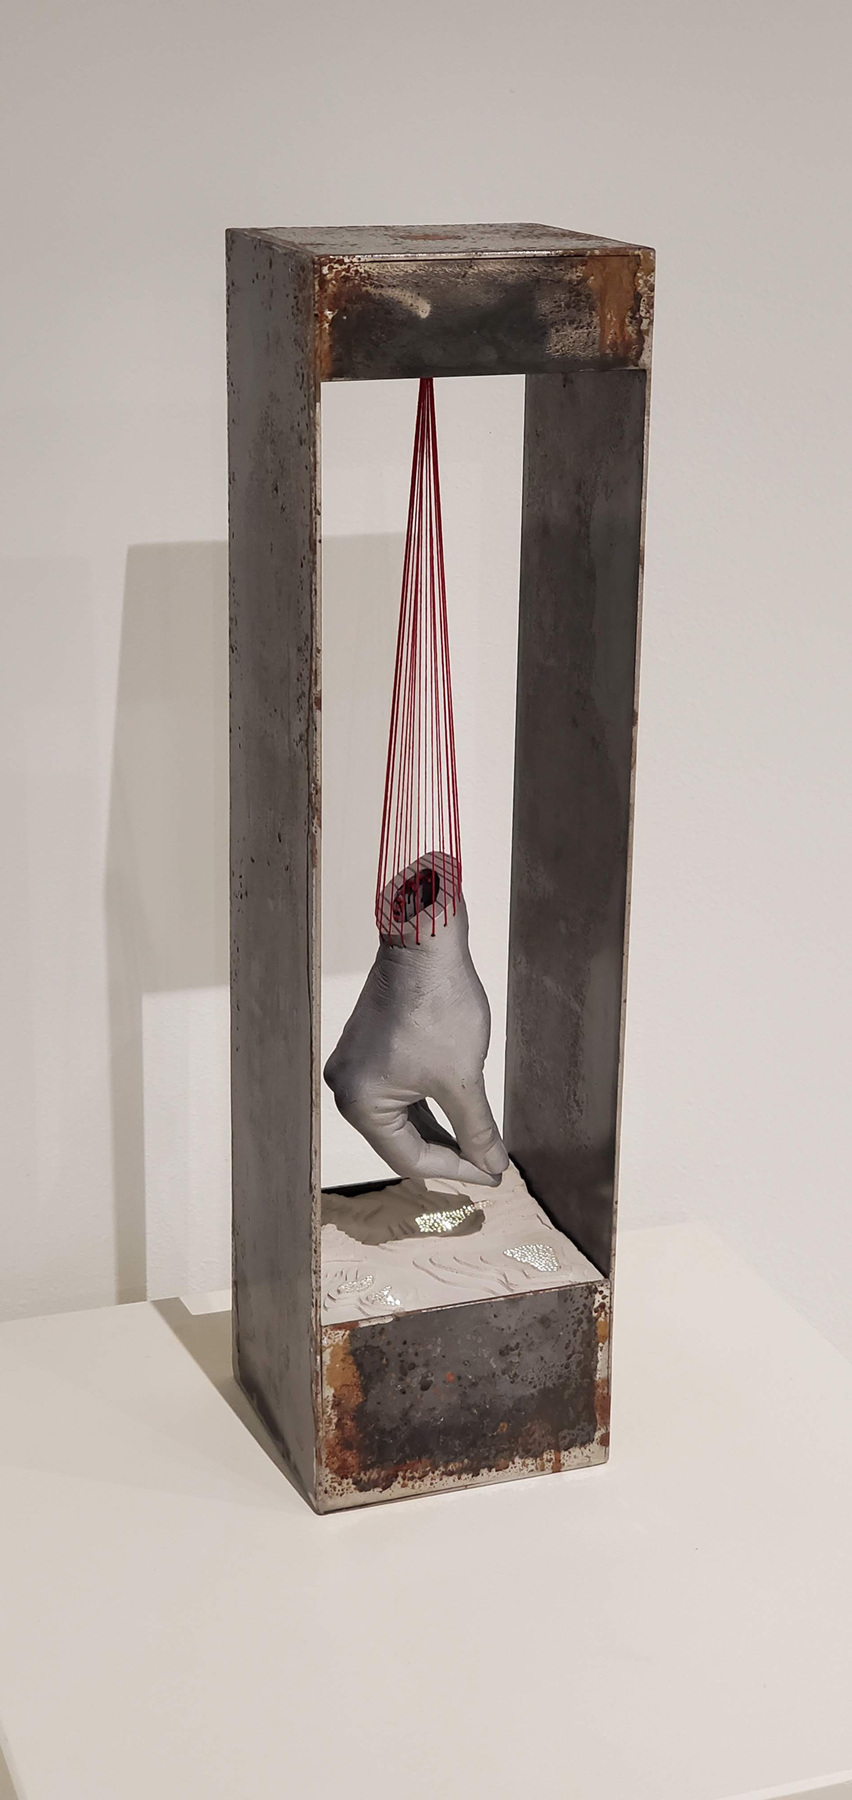 cast concrete hand hanging from red thread in an aluminum box with a topographic map at the base,  image courtesy of the artist